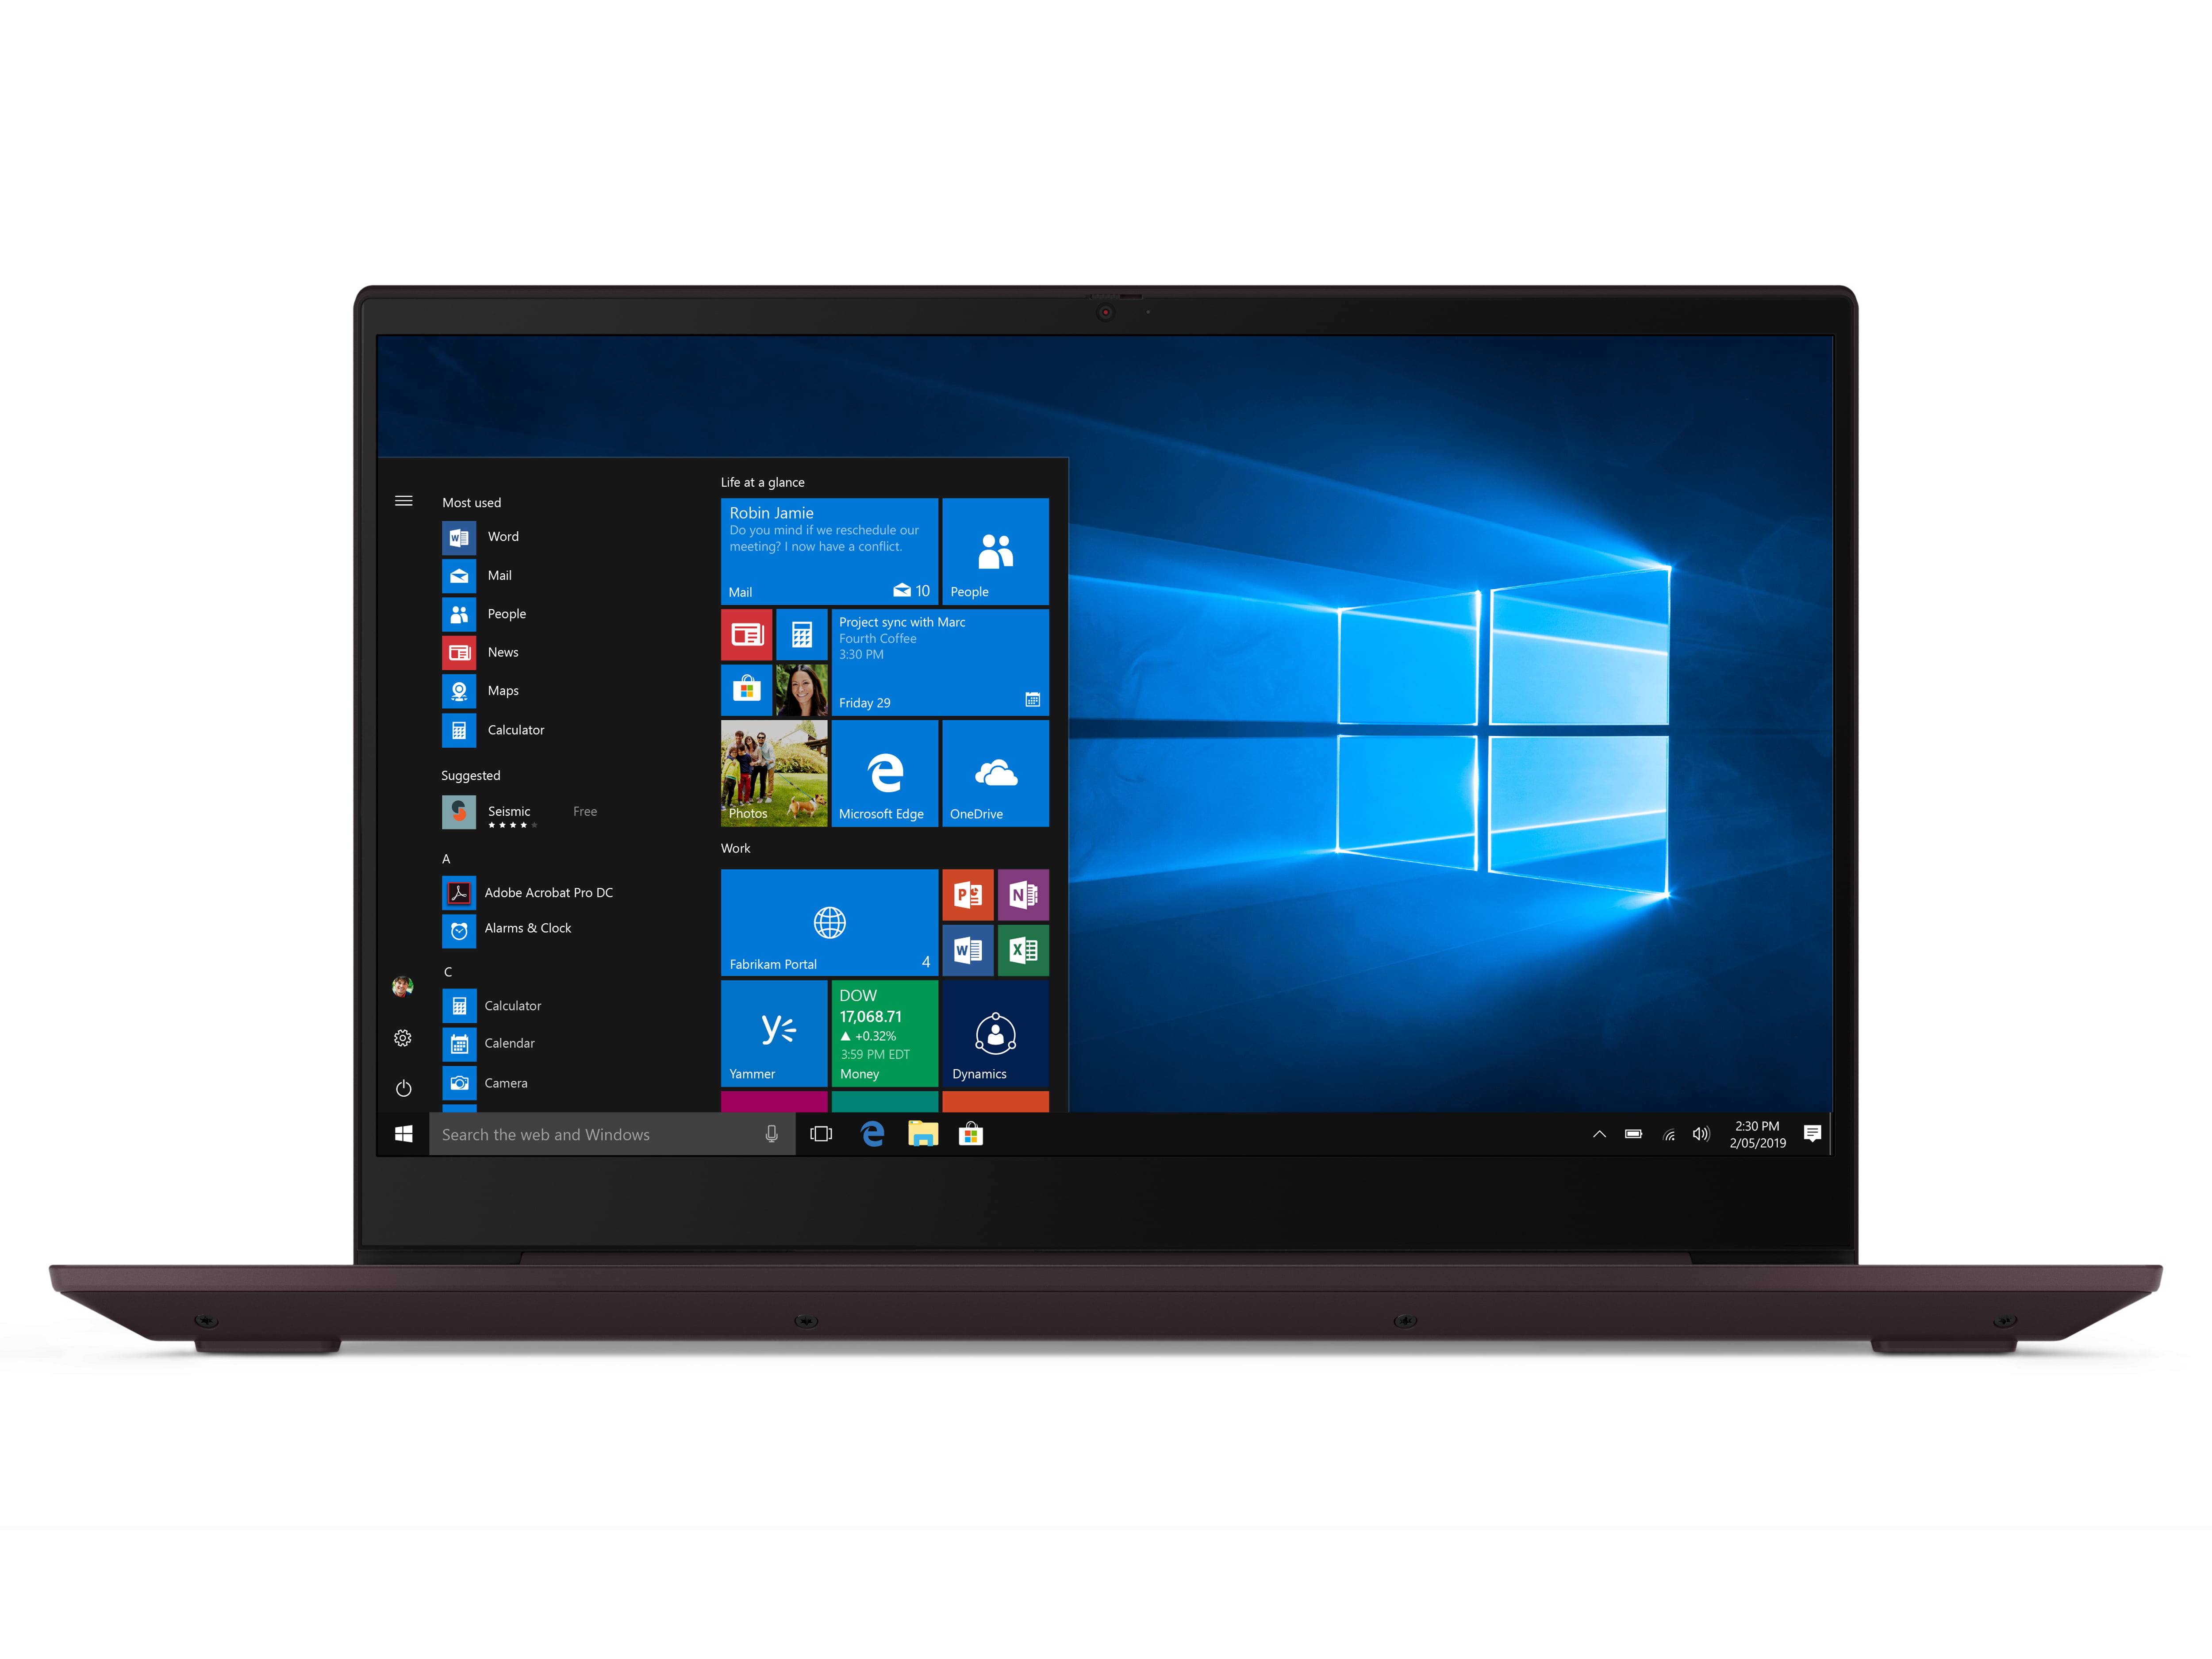 Lenovo IdeaPad S340 15 with 10th gen Core i5, 8 GB DDR4 RAM, 256 GB SSD,  and 1080p display on sale for $470 USD -  News